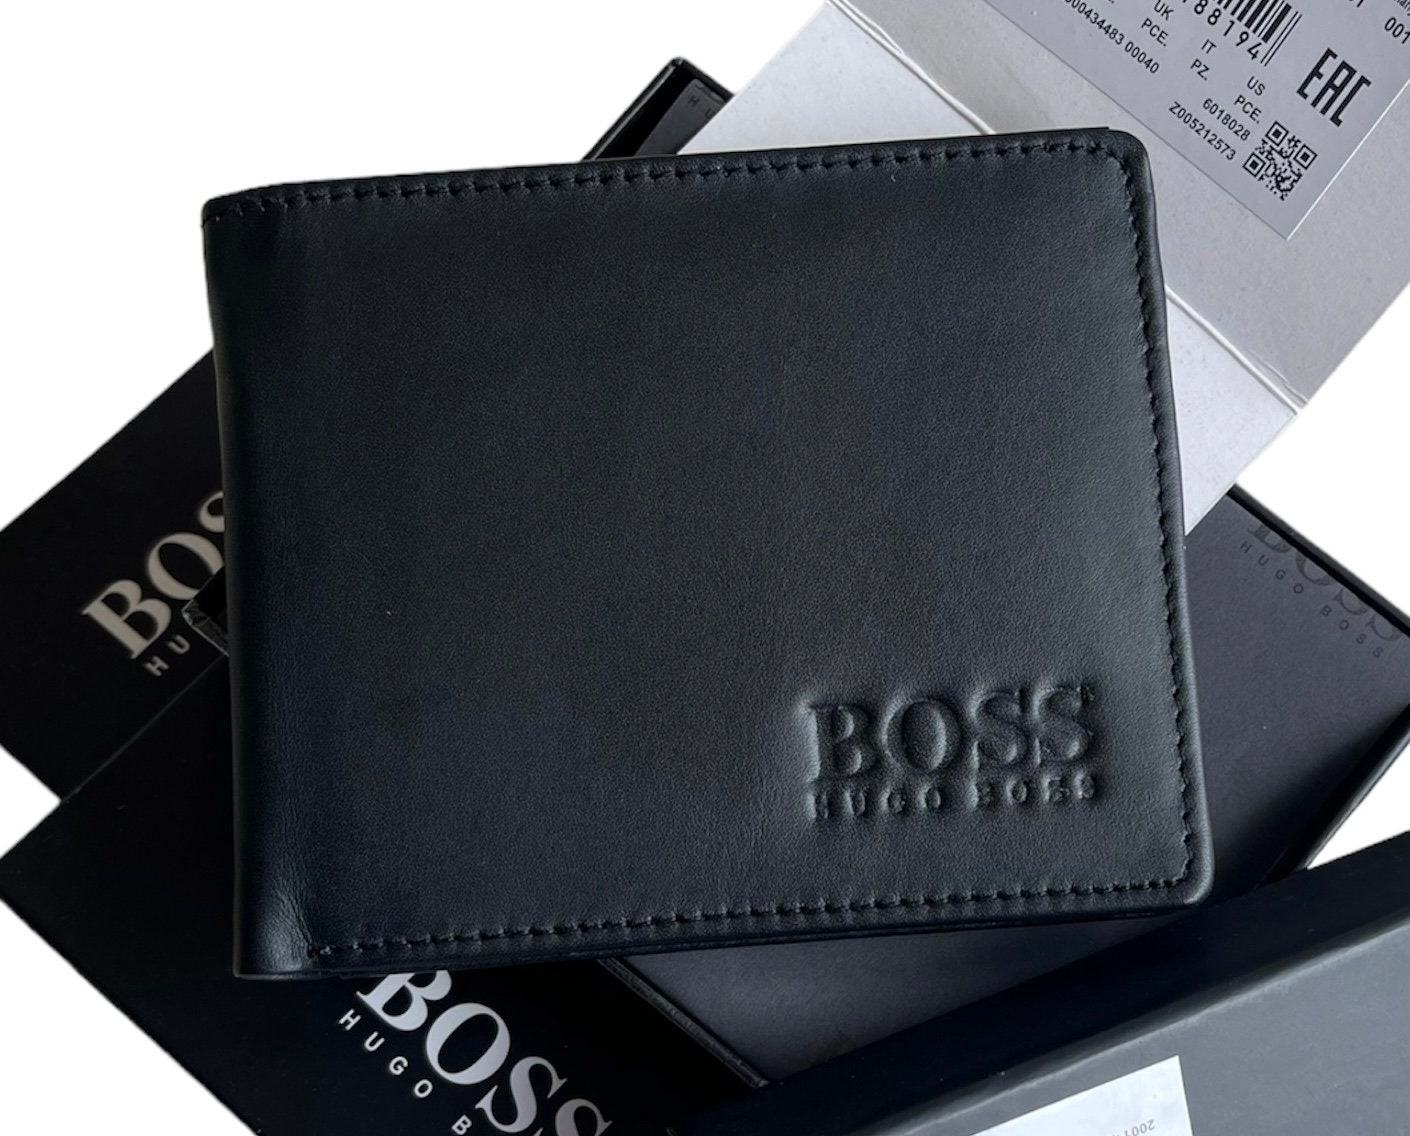 New Hugo Boss Men's Bifold Genuine Leather Wallet Credit Card, Notes ...